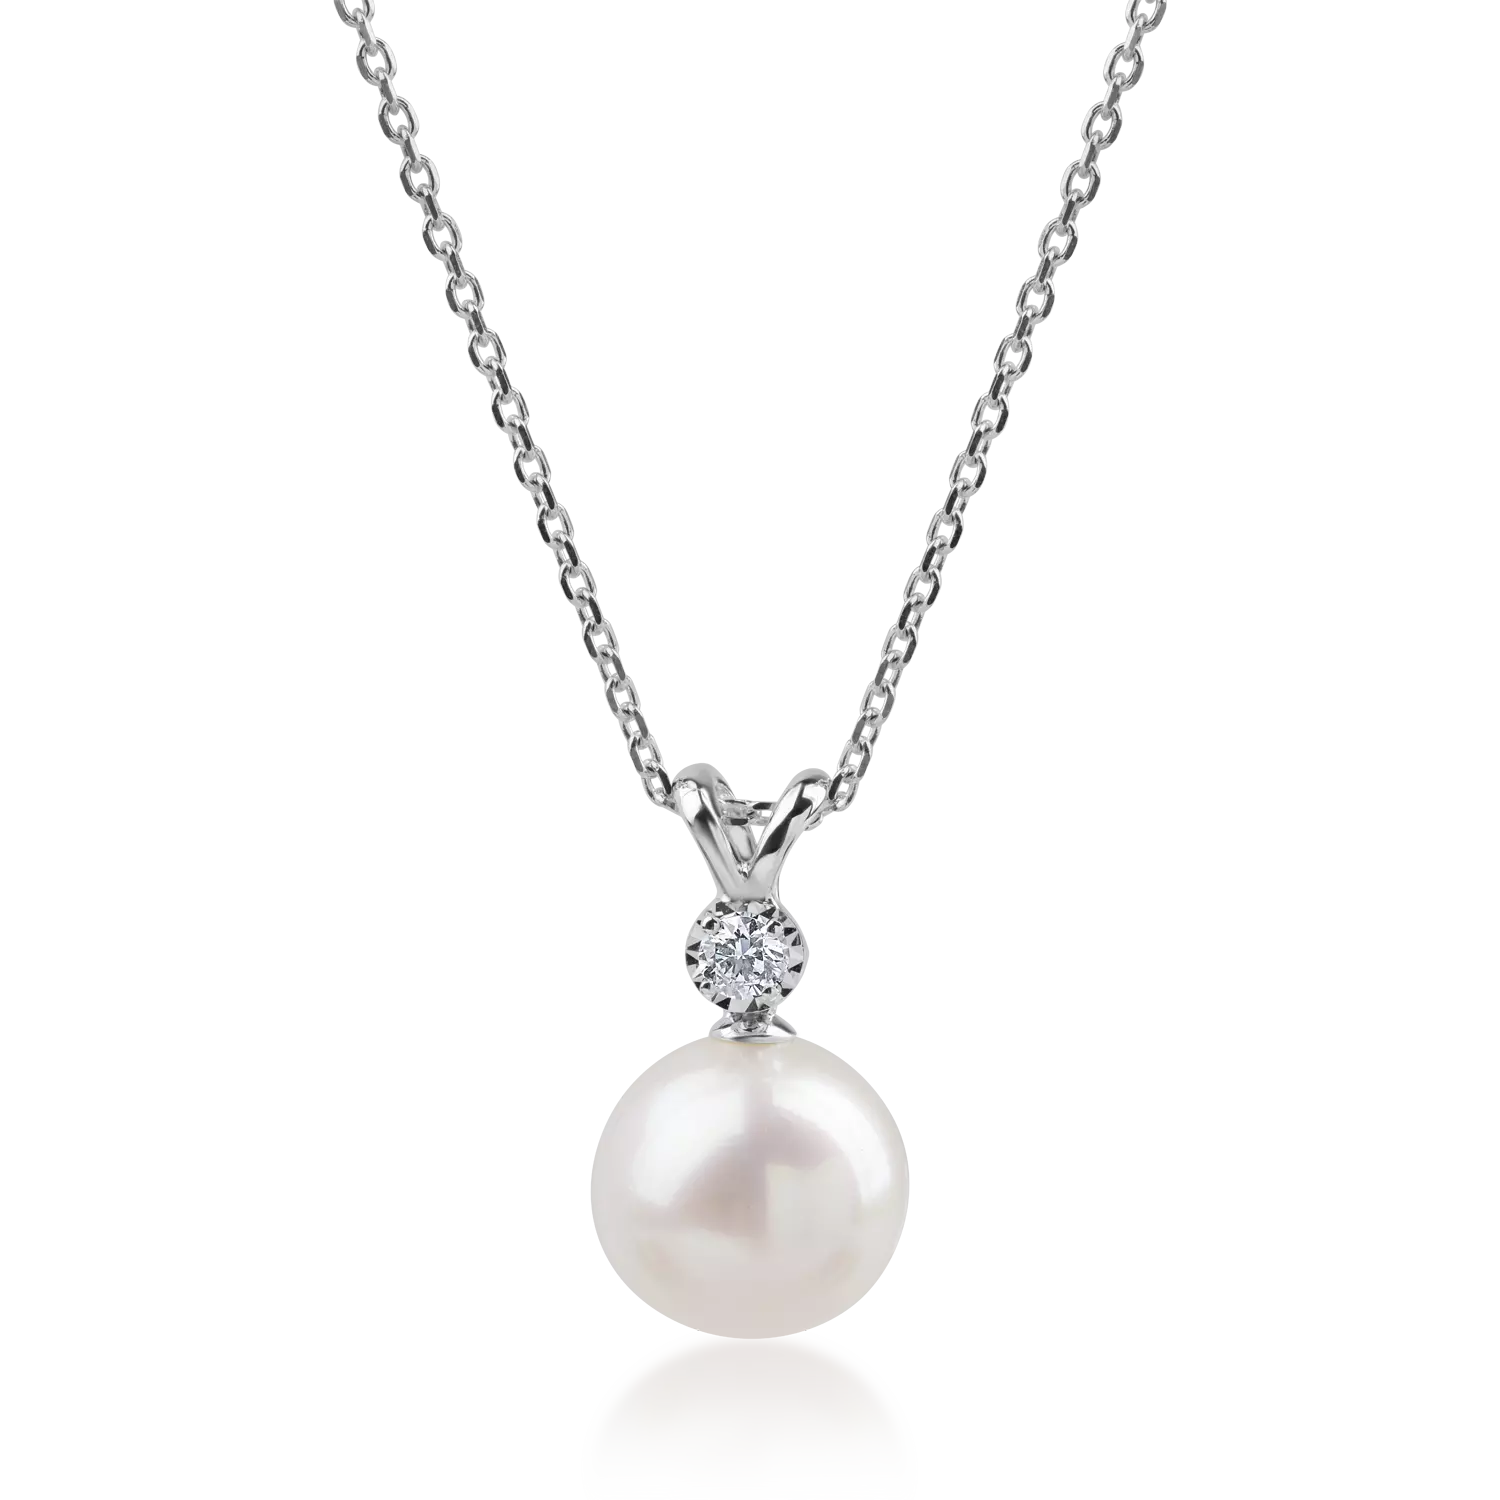 White gold pendant chain with a freshwater cultured pearl and a 0.09ct diamond